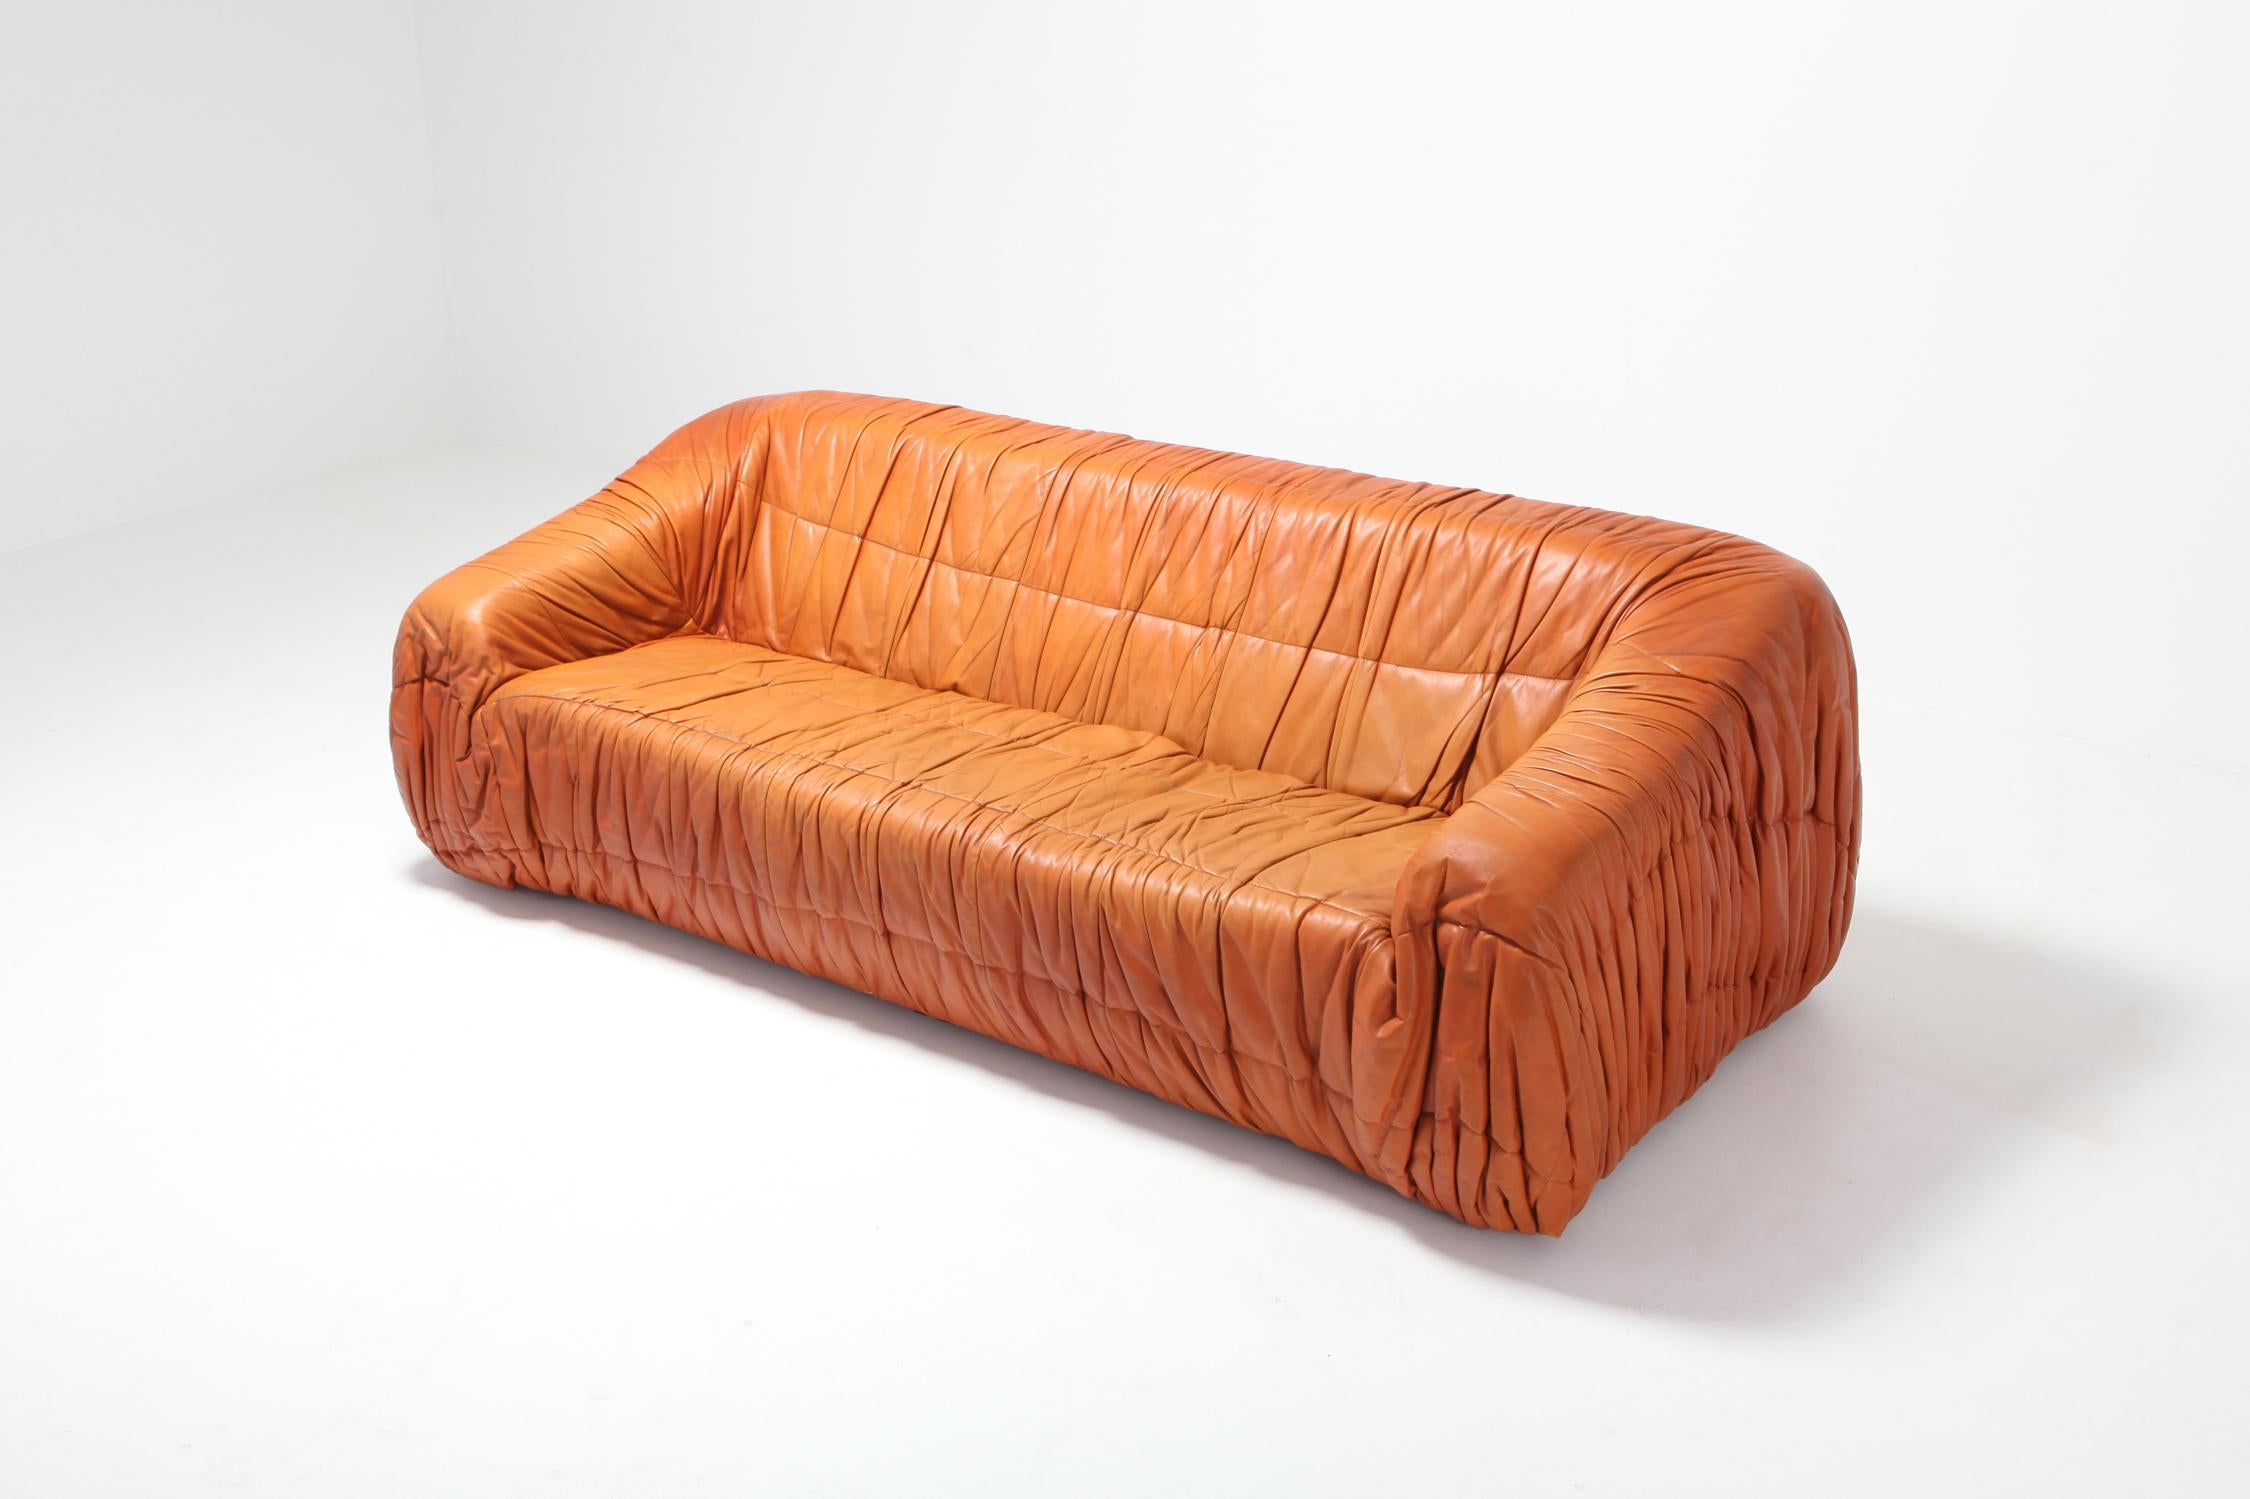 De Pas, D’urbino & Lomazzi designed this cognac leather piece for Dell'Oca in the 1970s
Fantastic shape completely moulded out of foam and therefore extremely comfortable. Covered with gorgeous cognac colored leather. In excellent condition.
The